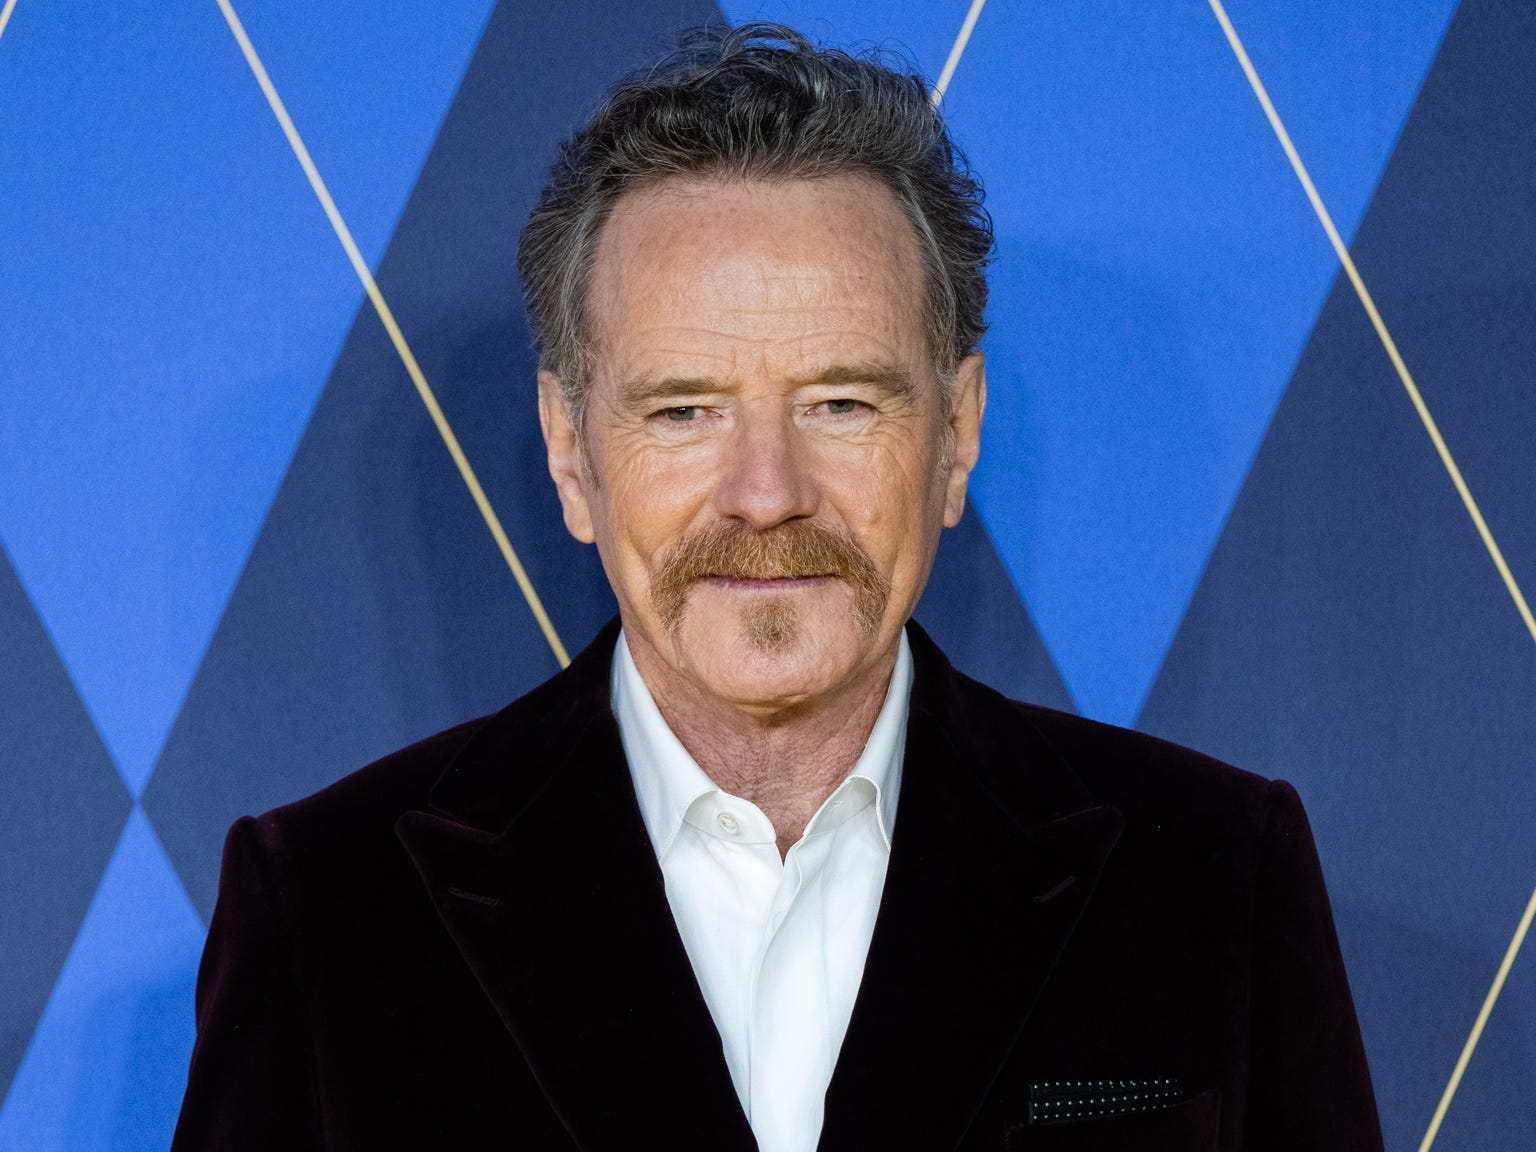 <p>He landed the leading role of Hal Wilkerson on Fox's comedy "Malcolm in the Middle,"  earning three Emmy nominations.</p><p>Two years after "Malcolm in the Middle" ended, Cranston found even more success as the terminally ill high-school chemistry teacher Walter White on AMC's "<a href="https://www.businessinsider.com/the-best-movies-to-watch-if-you-like-breaking-bad">Breaking Bad</a>." He won <a href="https://www.businessinsider.com/bryan-cranston-wins-fourth-emmy-2014-8#:~:text=Bryan%20Cranston%20Beats%20Matthew%20McConaughey%20To%20Win%20Fourth%20Emmy&text=In%20one%20of%20the%20tightest,the%20actor's%20fourth%20Emmy%20win.">multiple Emmys</a> for it. </p><p>Cranston won critical acclaim on Broadway as well, winning <a href="https://www.businessinsider.com/bryan-cranston-wins-tony-2014-6">Tony Awards</a> for playing American President Lyndon B. Johnson in "All the Way" (2013) and Howard Beale in "Network" (2017).</p><p>In recent years, he starred on Showtime's "Your Honor" from 2020 to 2023 and appeared in movies like "Asteroid City" (2023) and "Argylle" (2024).</p>